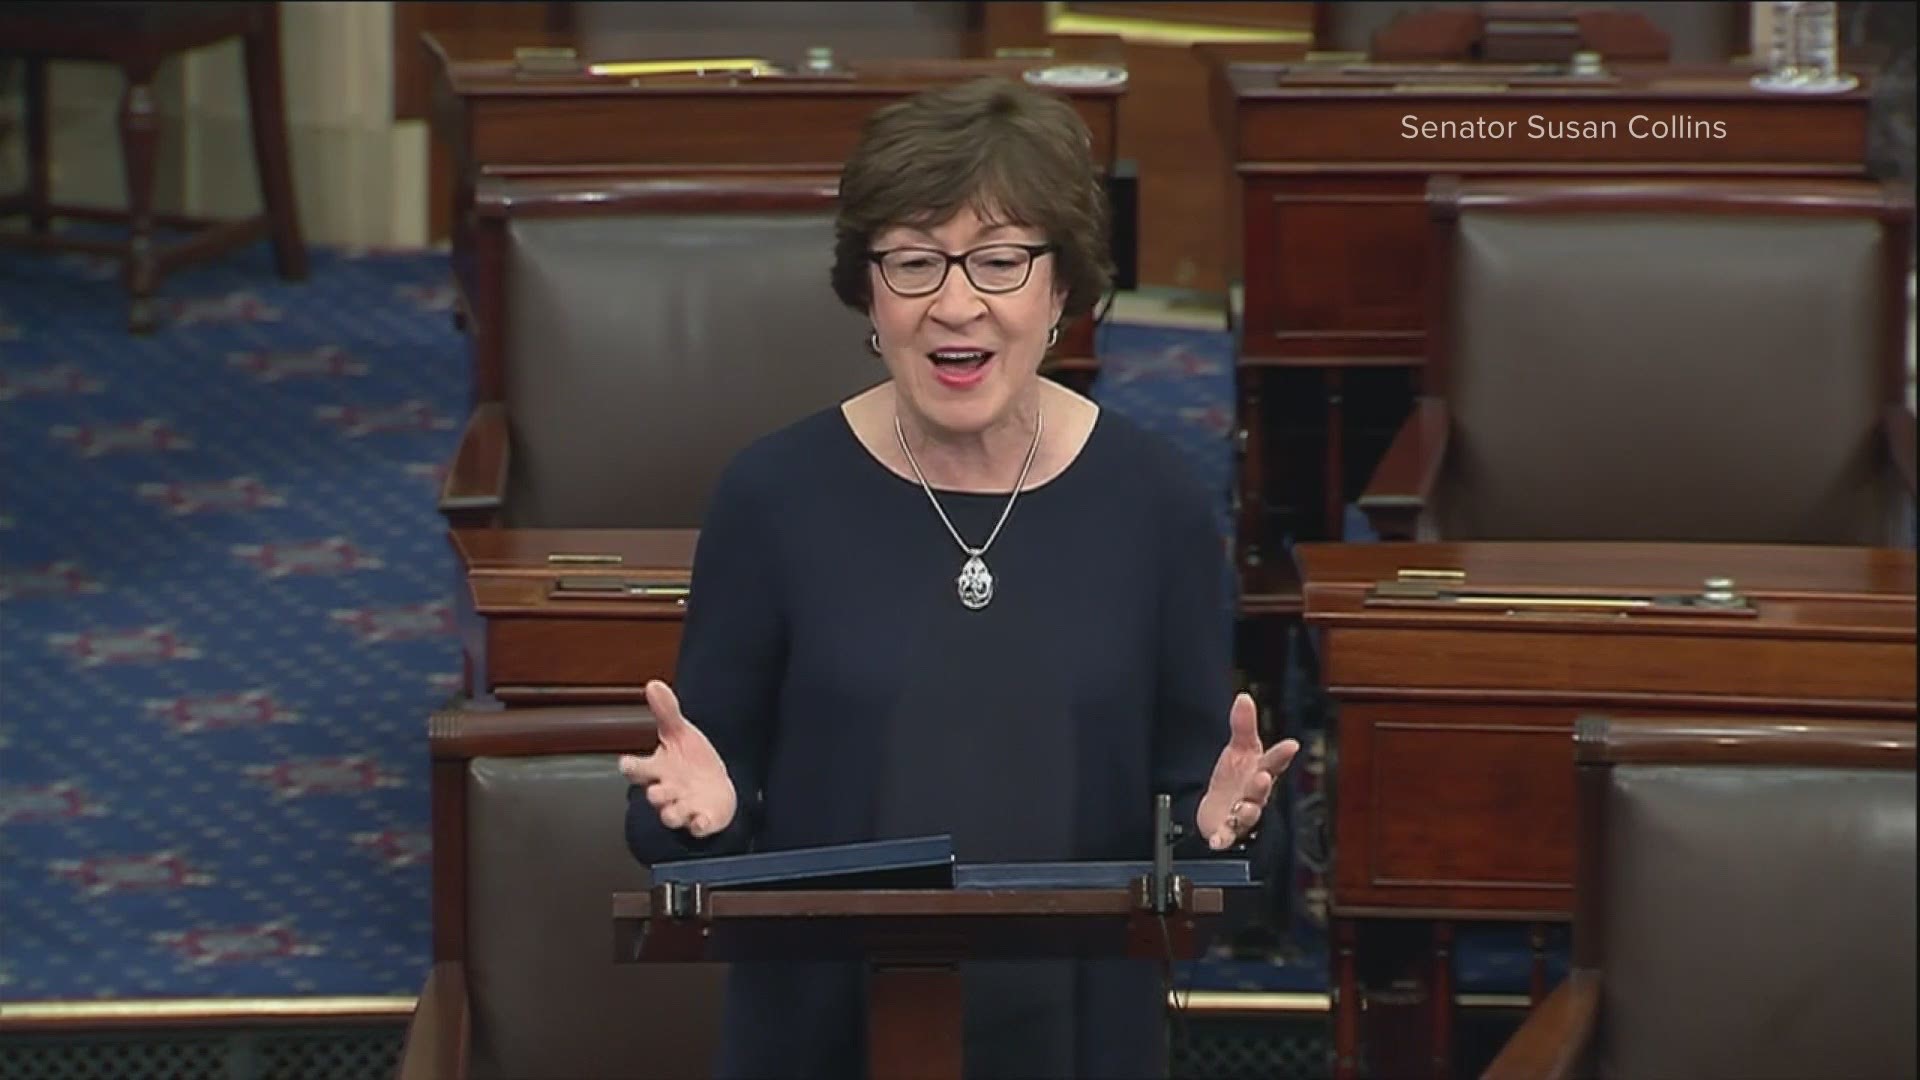 Senator Susan Collins is co-sponsoring the $15 billion American Broadband Buildout Act to help match state and Internet service provider funding in unserved areas.